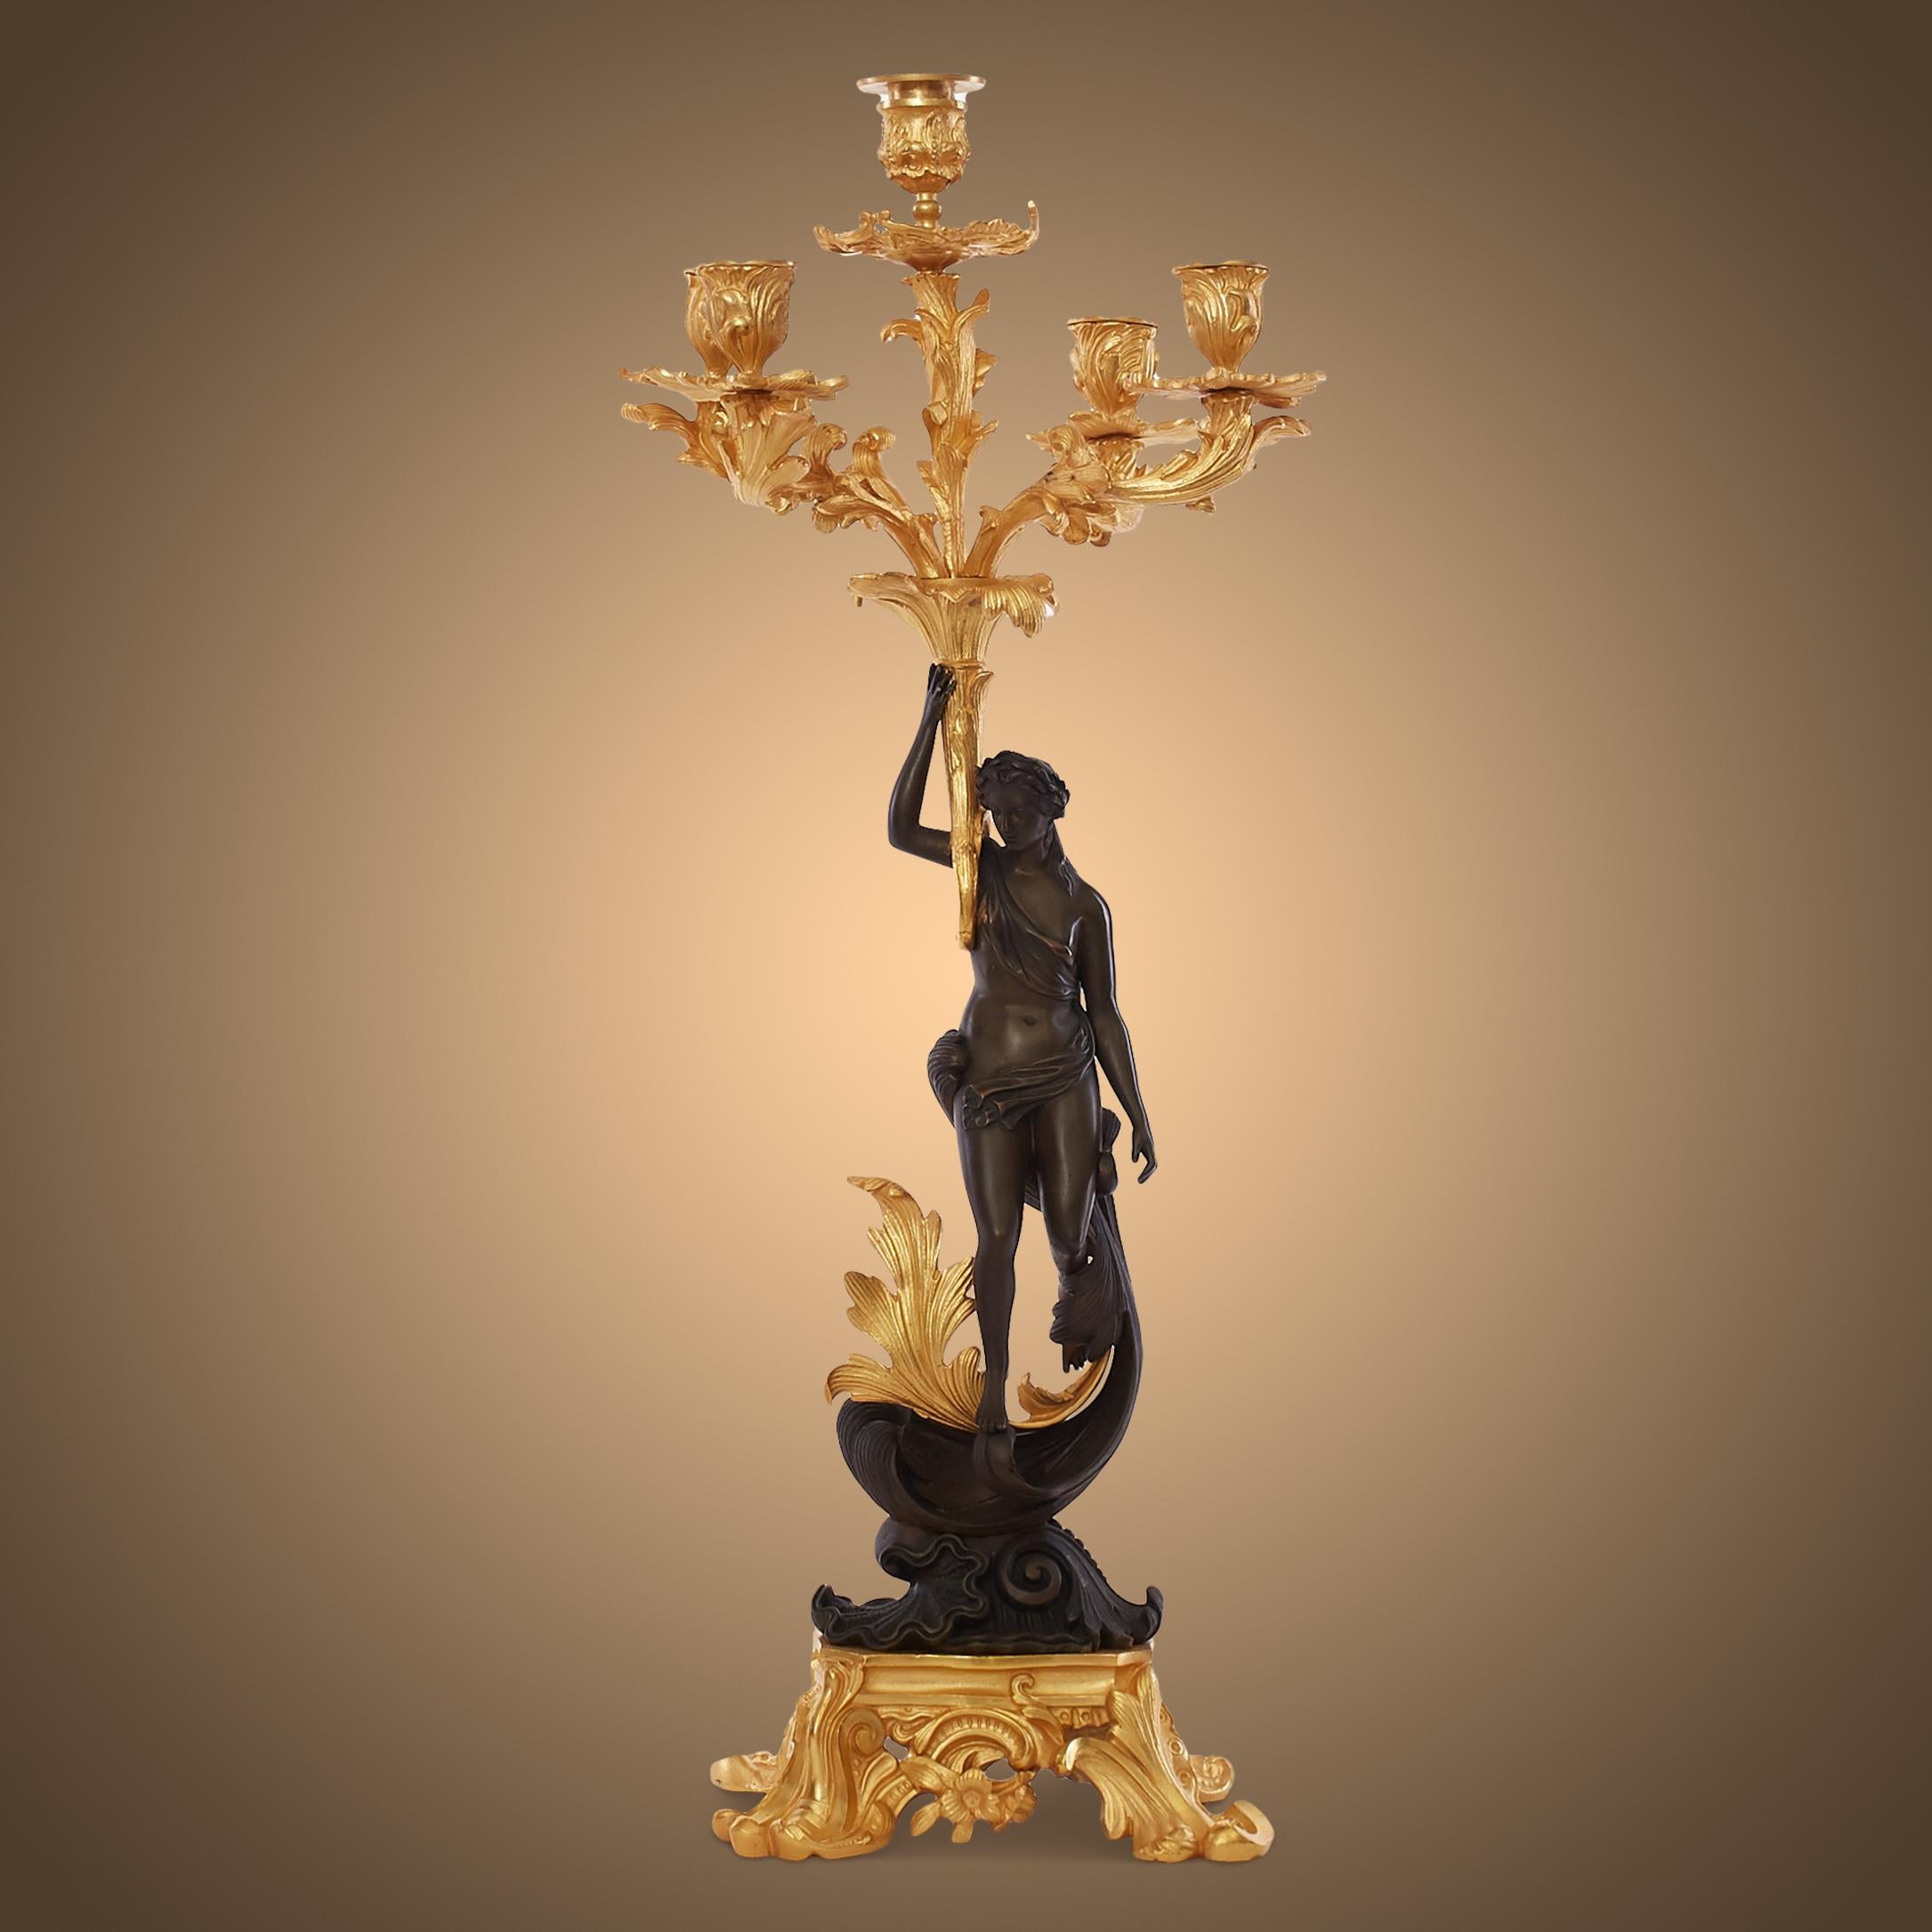 These are a pair of gilded candlesticks. On it were pictures of young women wearing antiques with their hair braided and carefully braided on top. The girl with 3 full rings is a symbol of the beauty of ancient western culture, in addition to